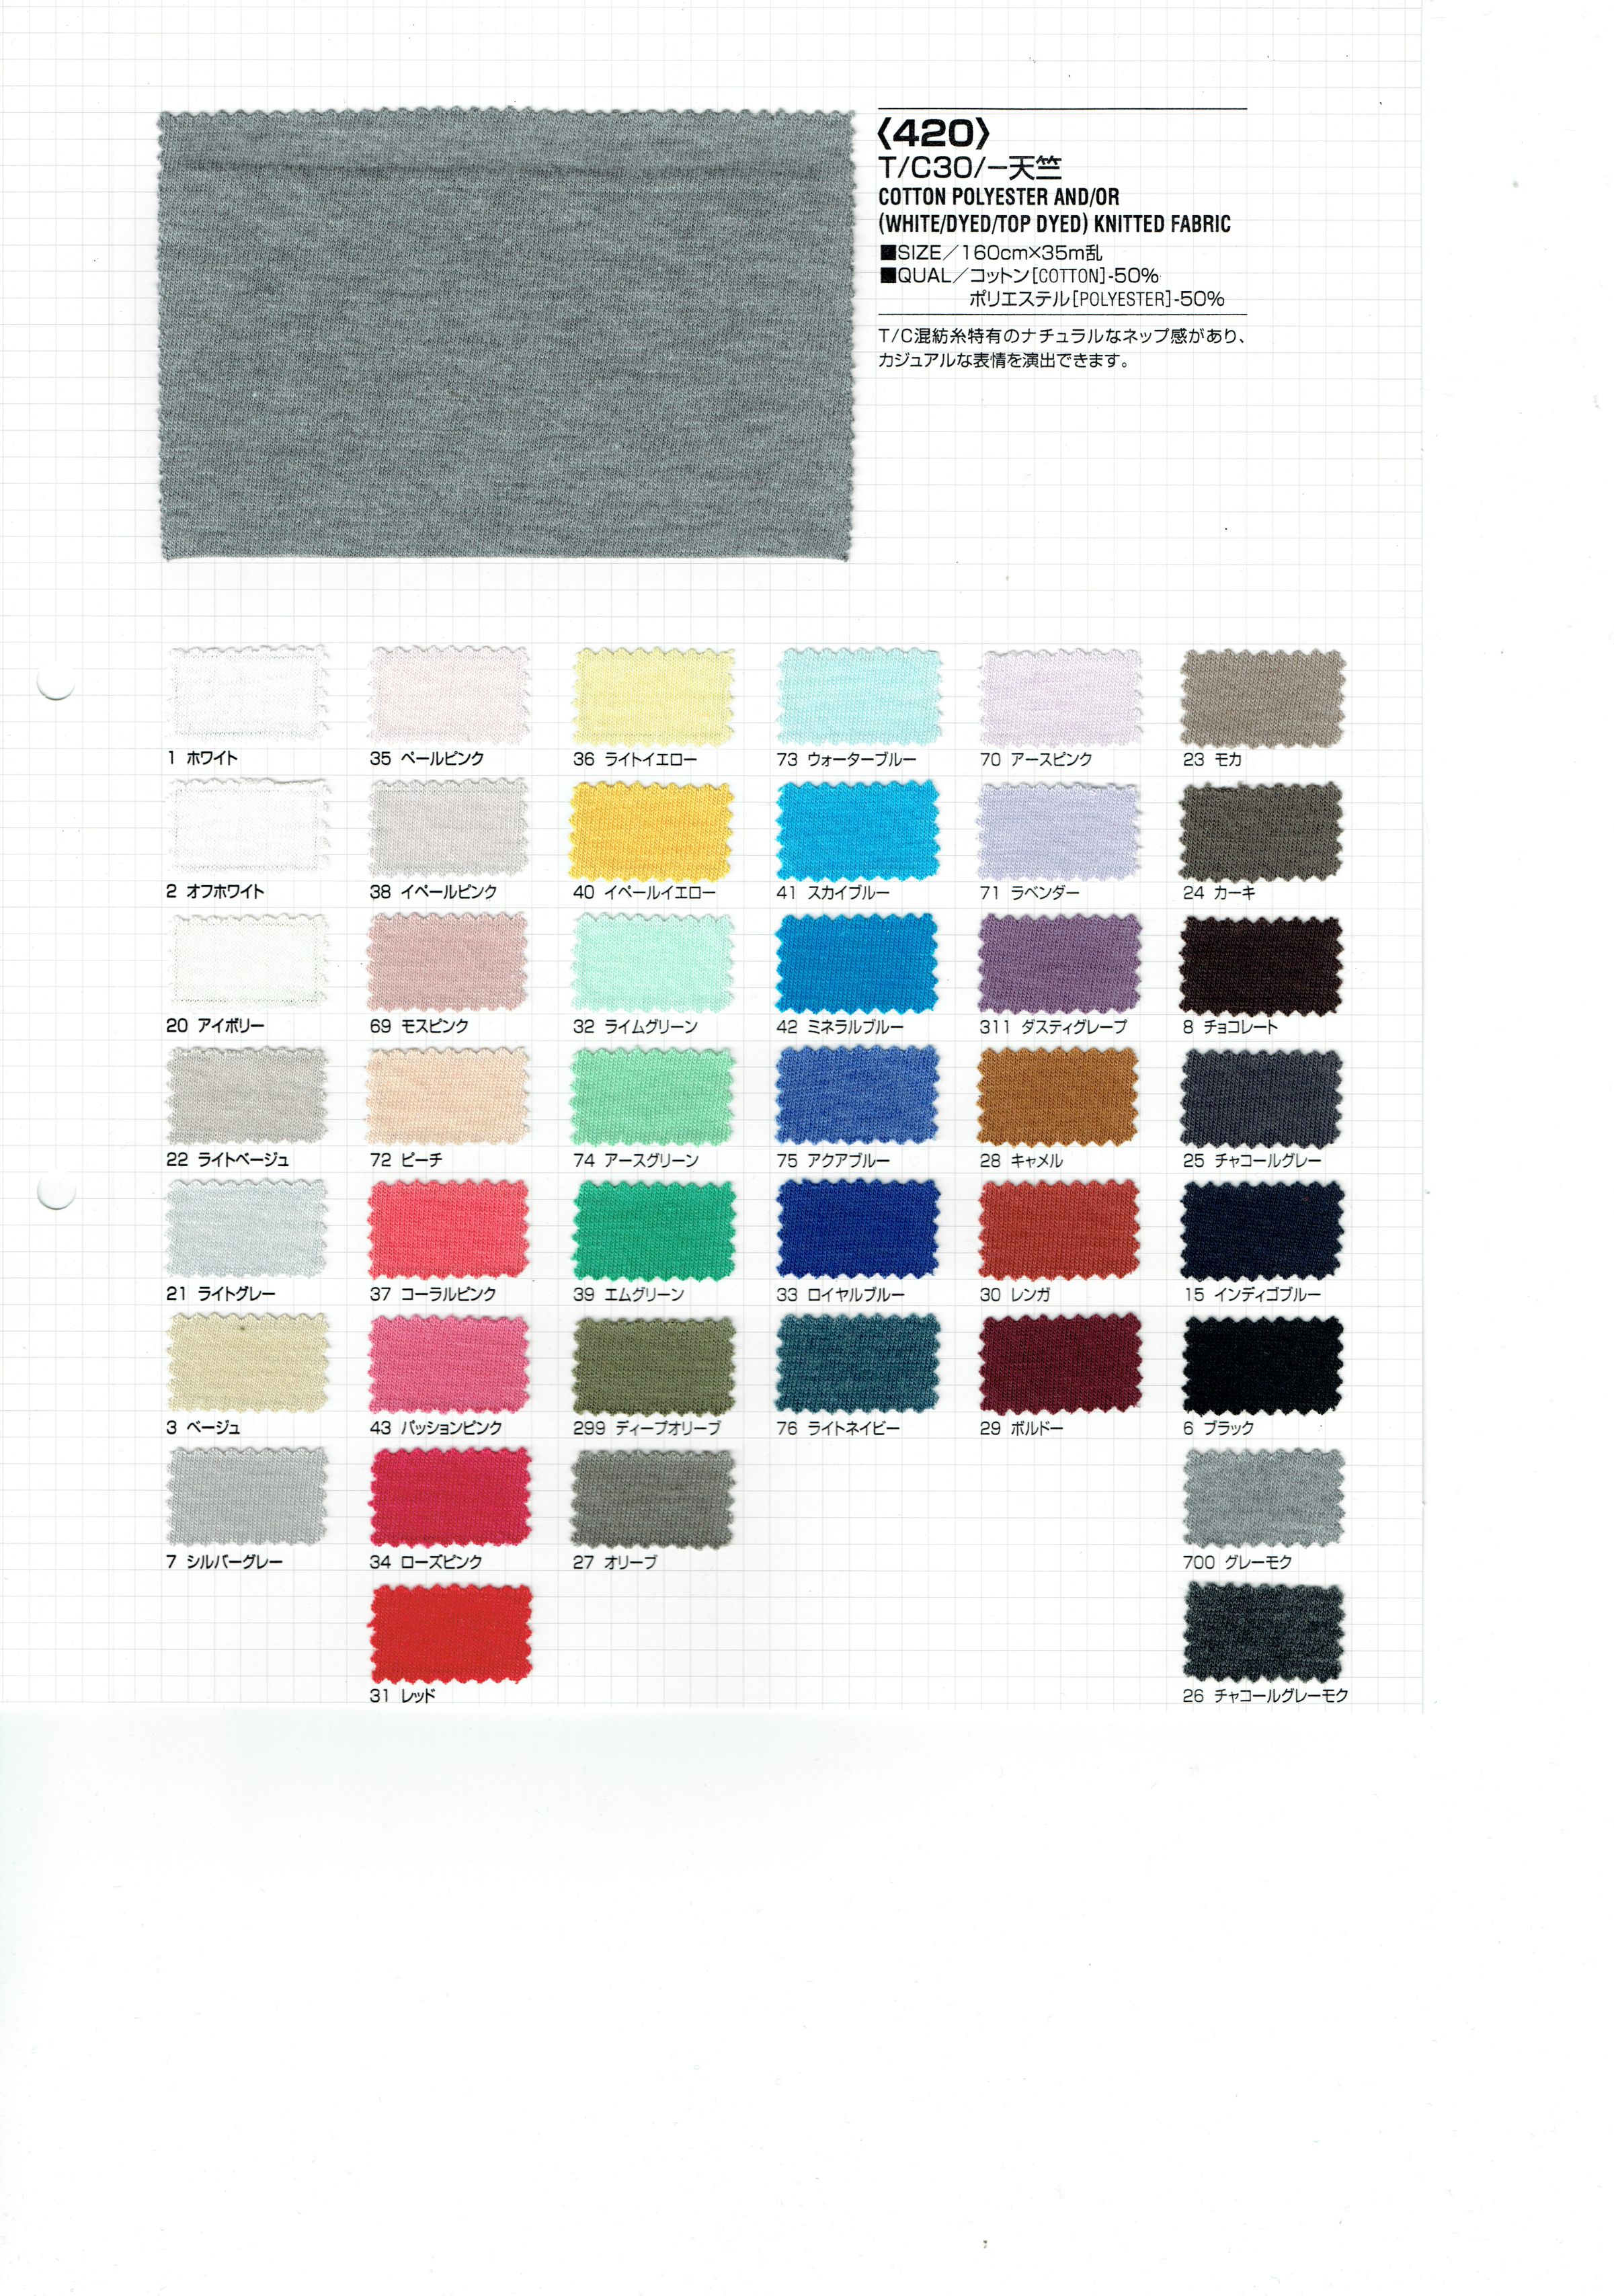 View 50% COTTON 50% POLYESTER AND/OR[WHITE/DYED/TOP DYED] KNITTED FABRIC